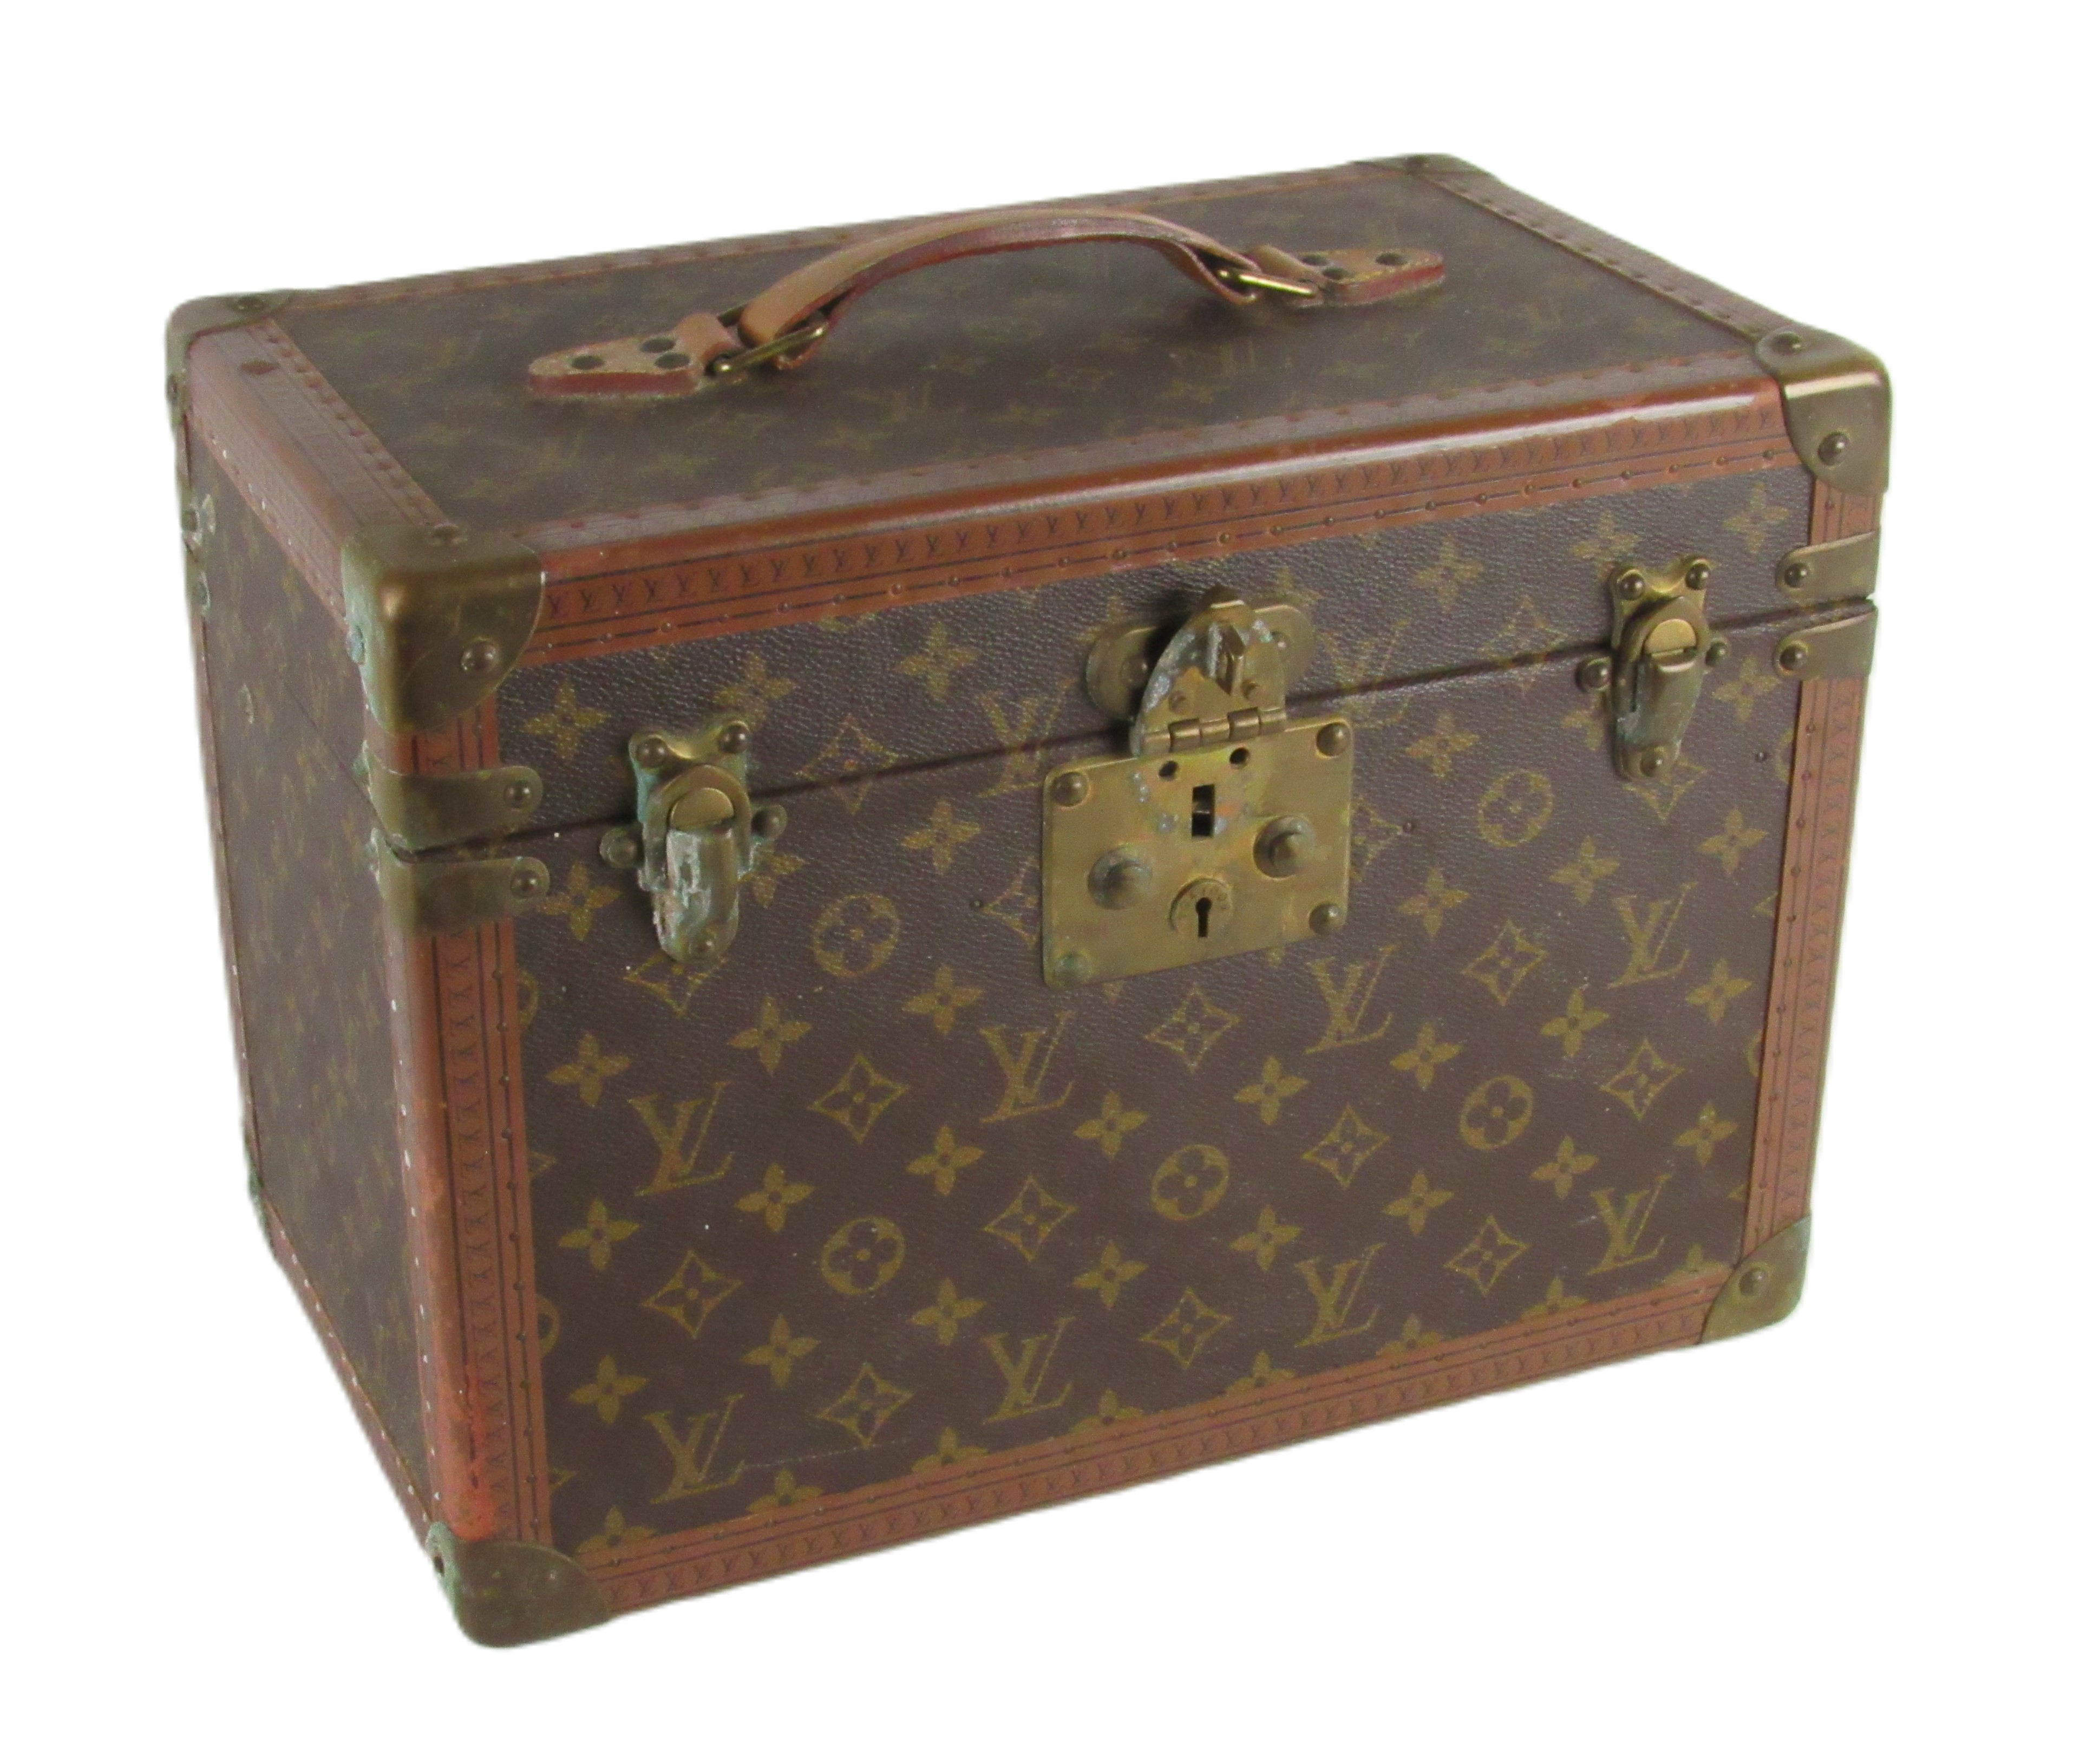 An original Louis Vuitton leather Vanity Case, with hinged top, carrying handle, opening to reveal